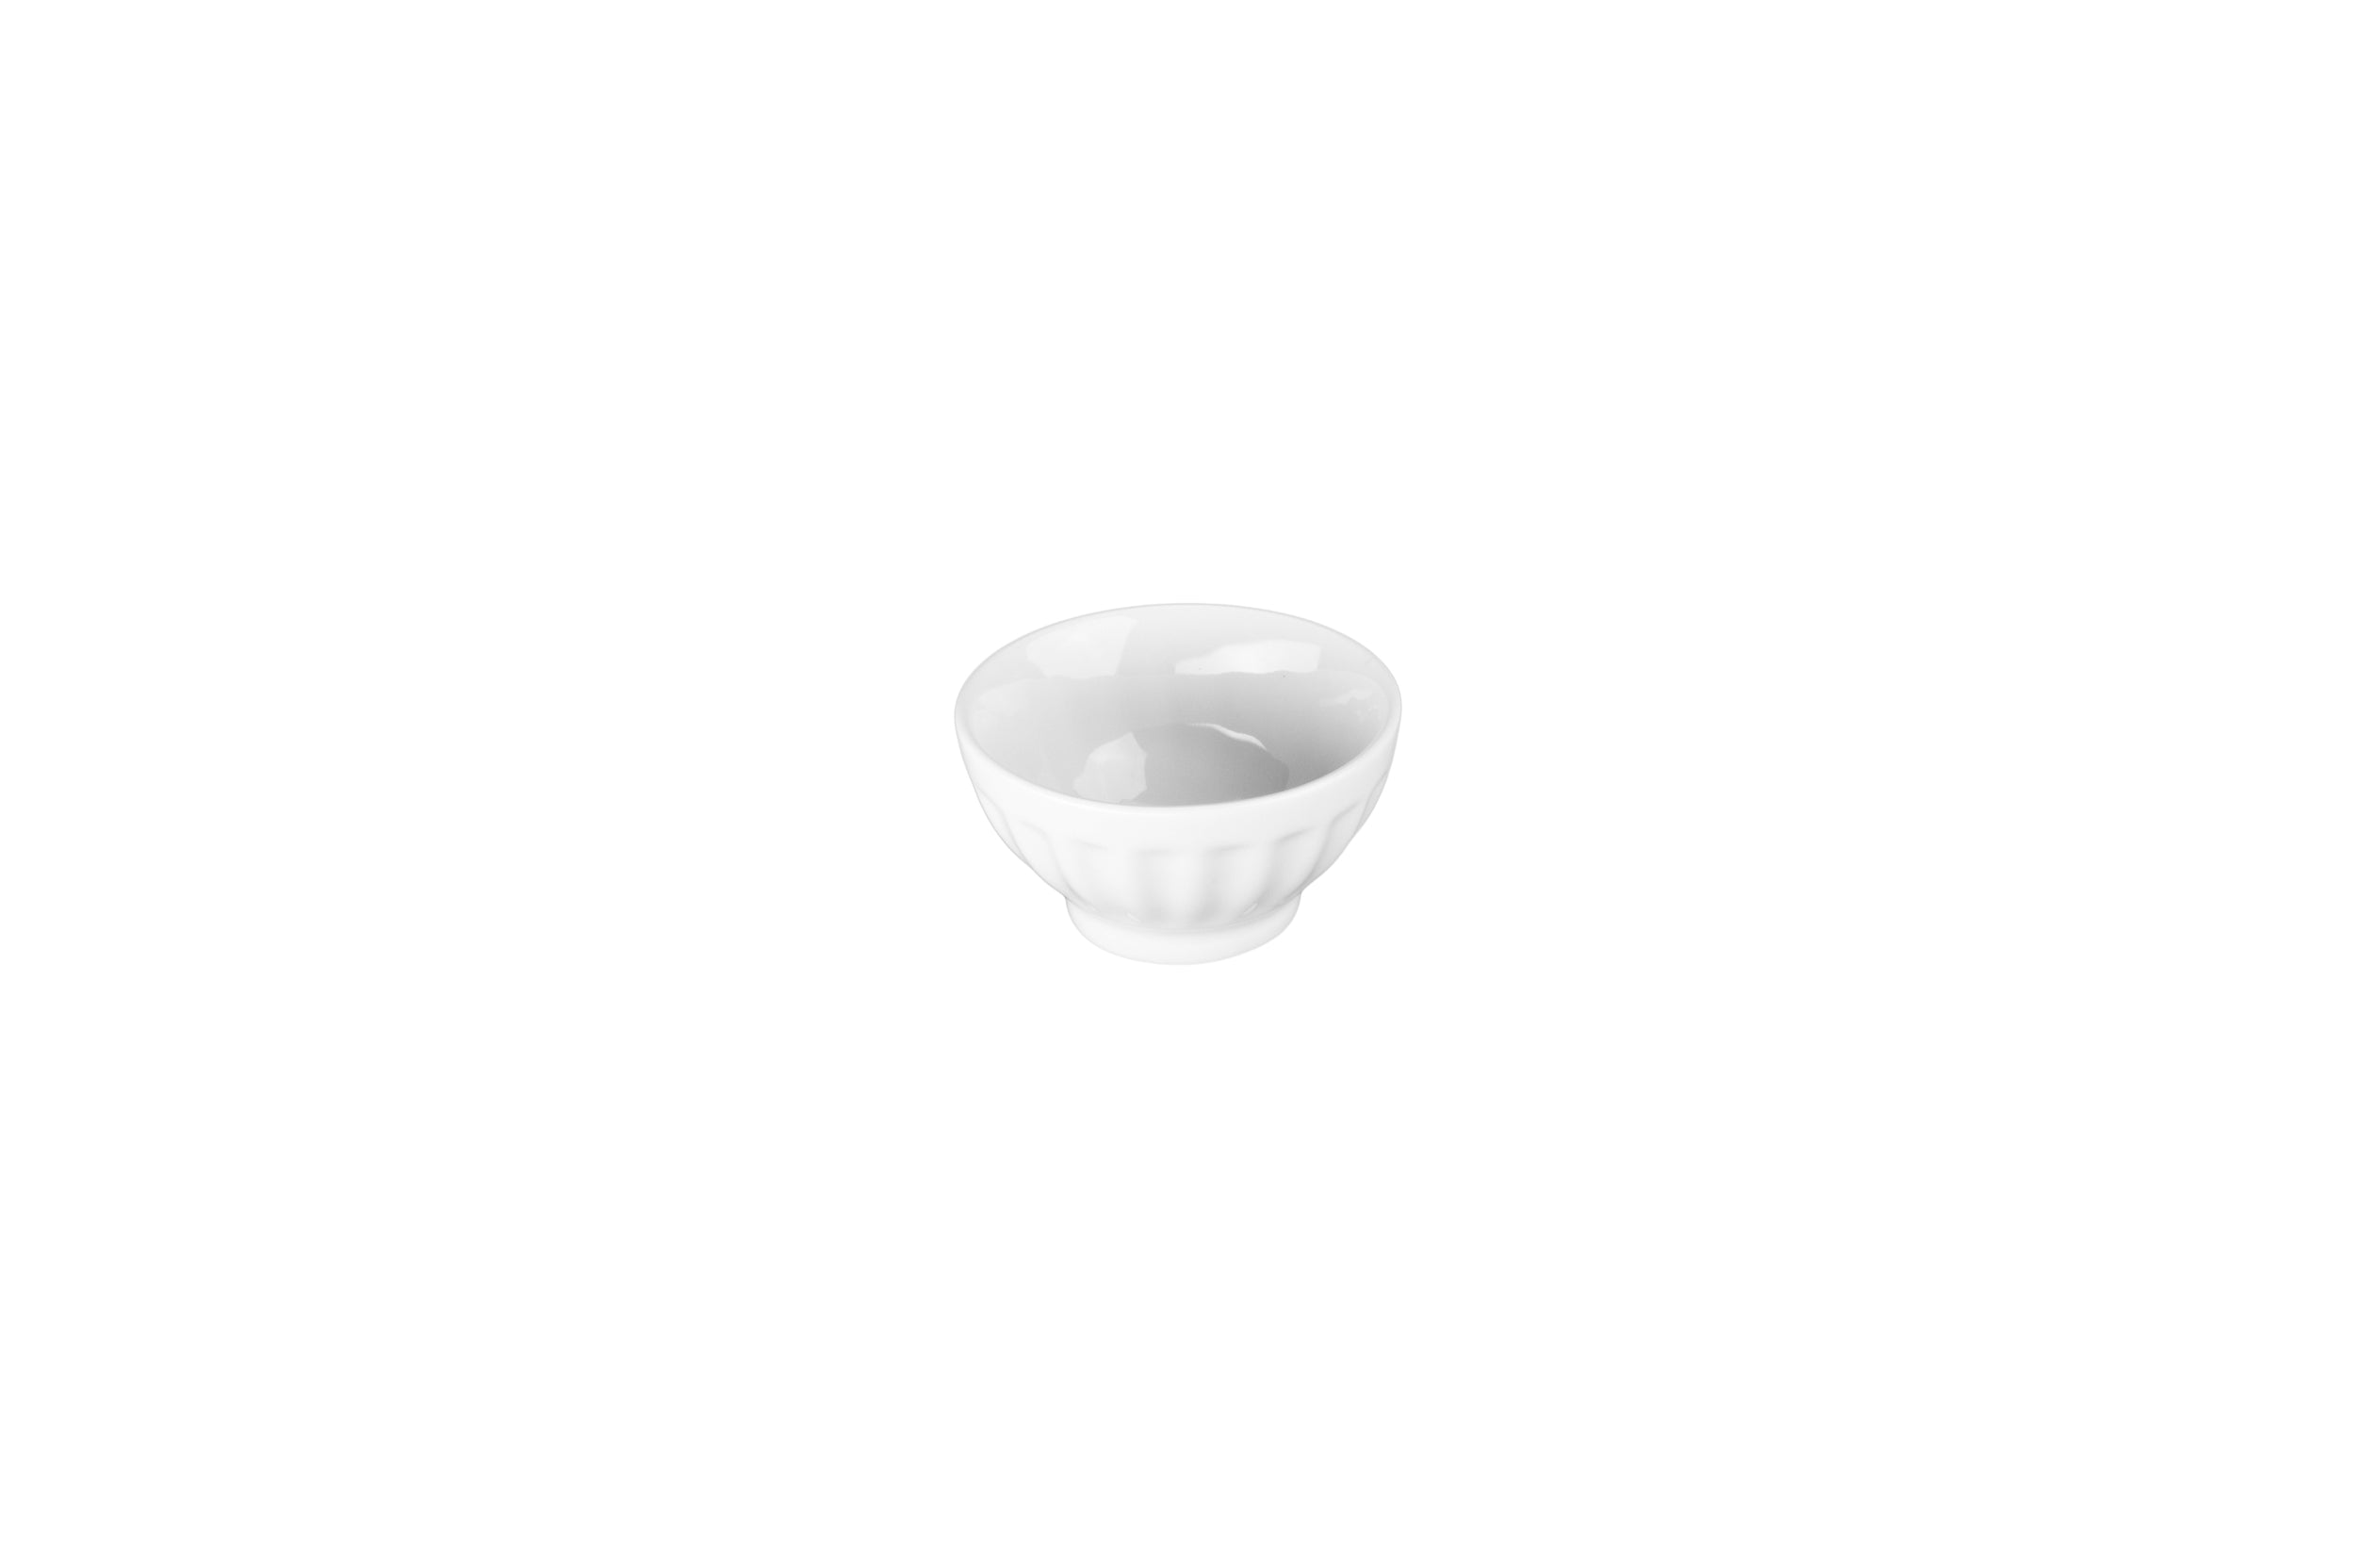 White ceramic, BIA Fluted Bowls on a white background.